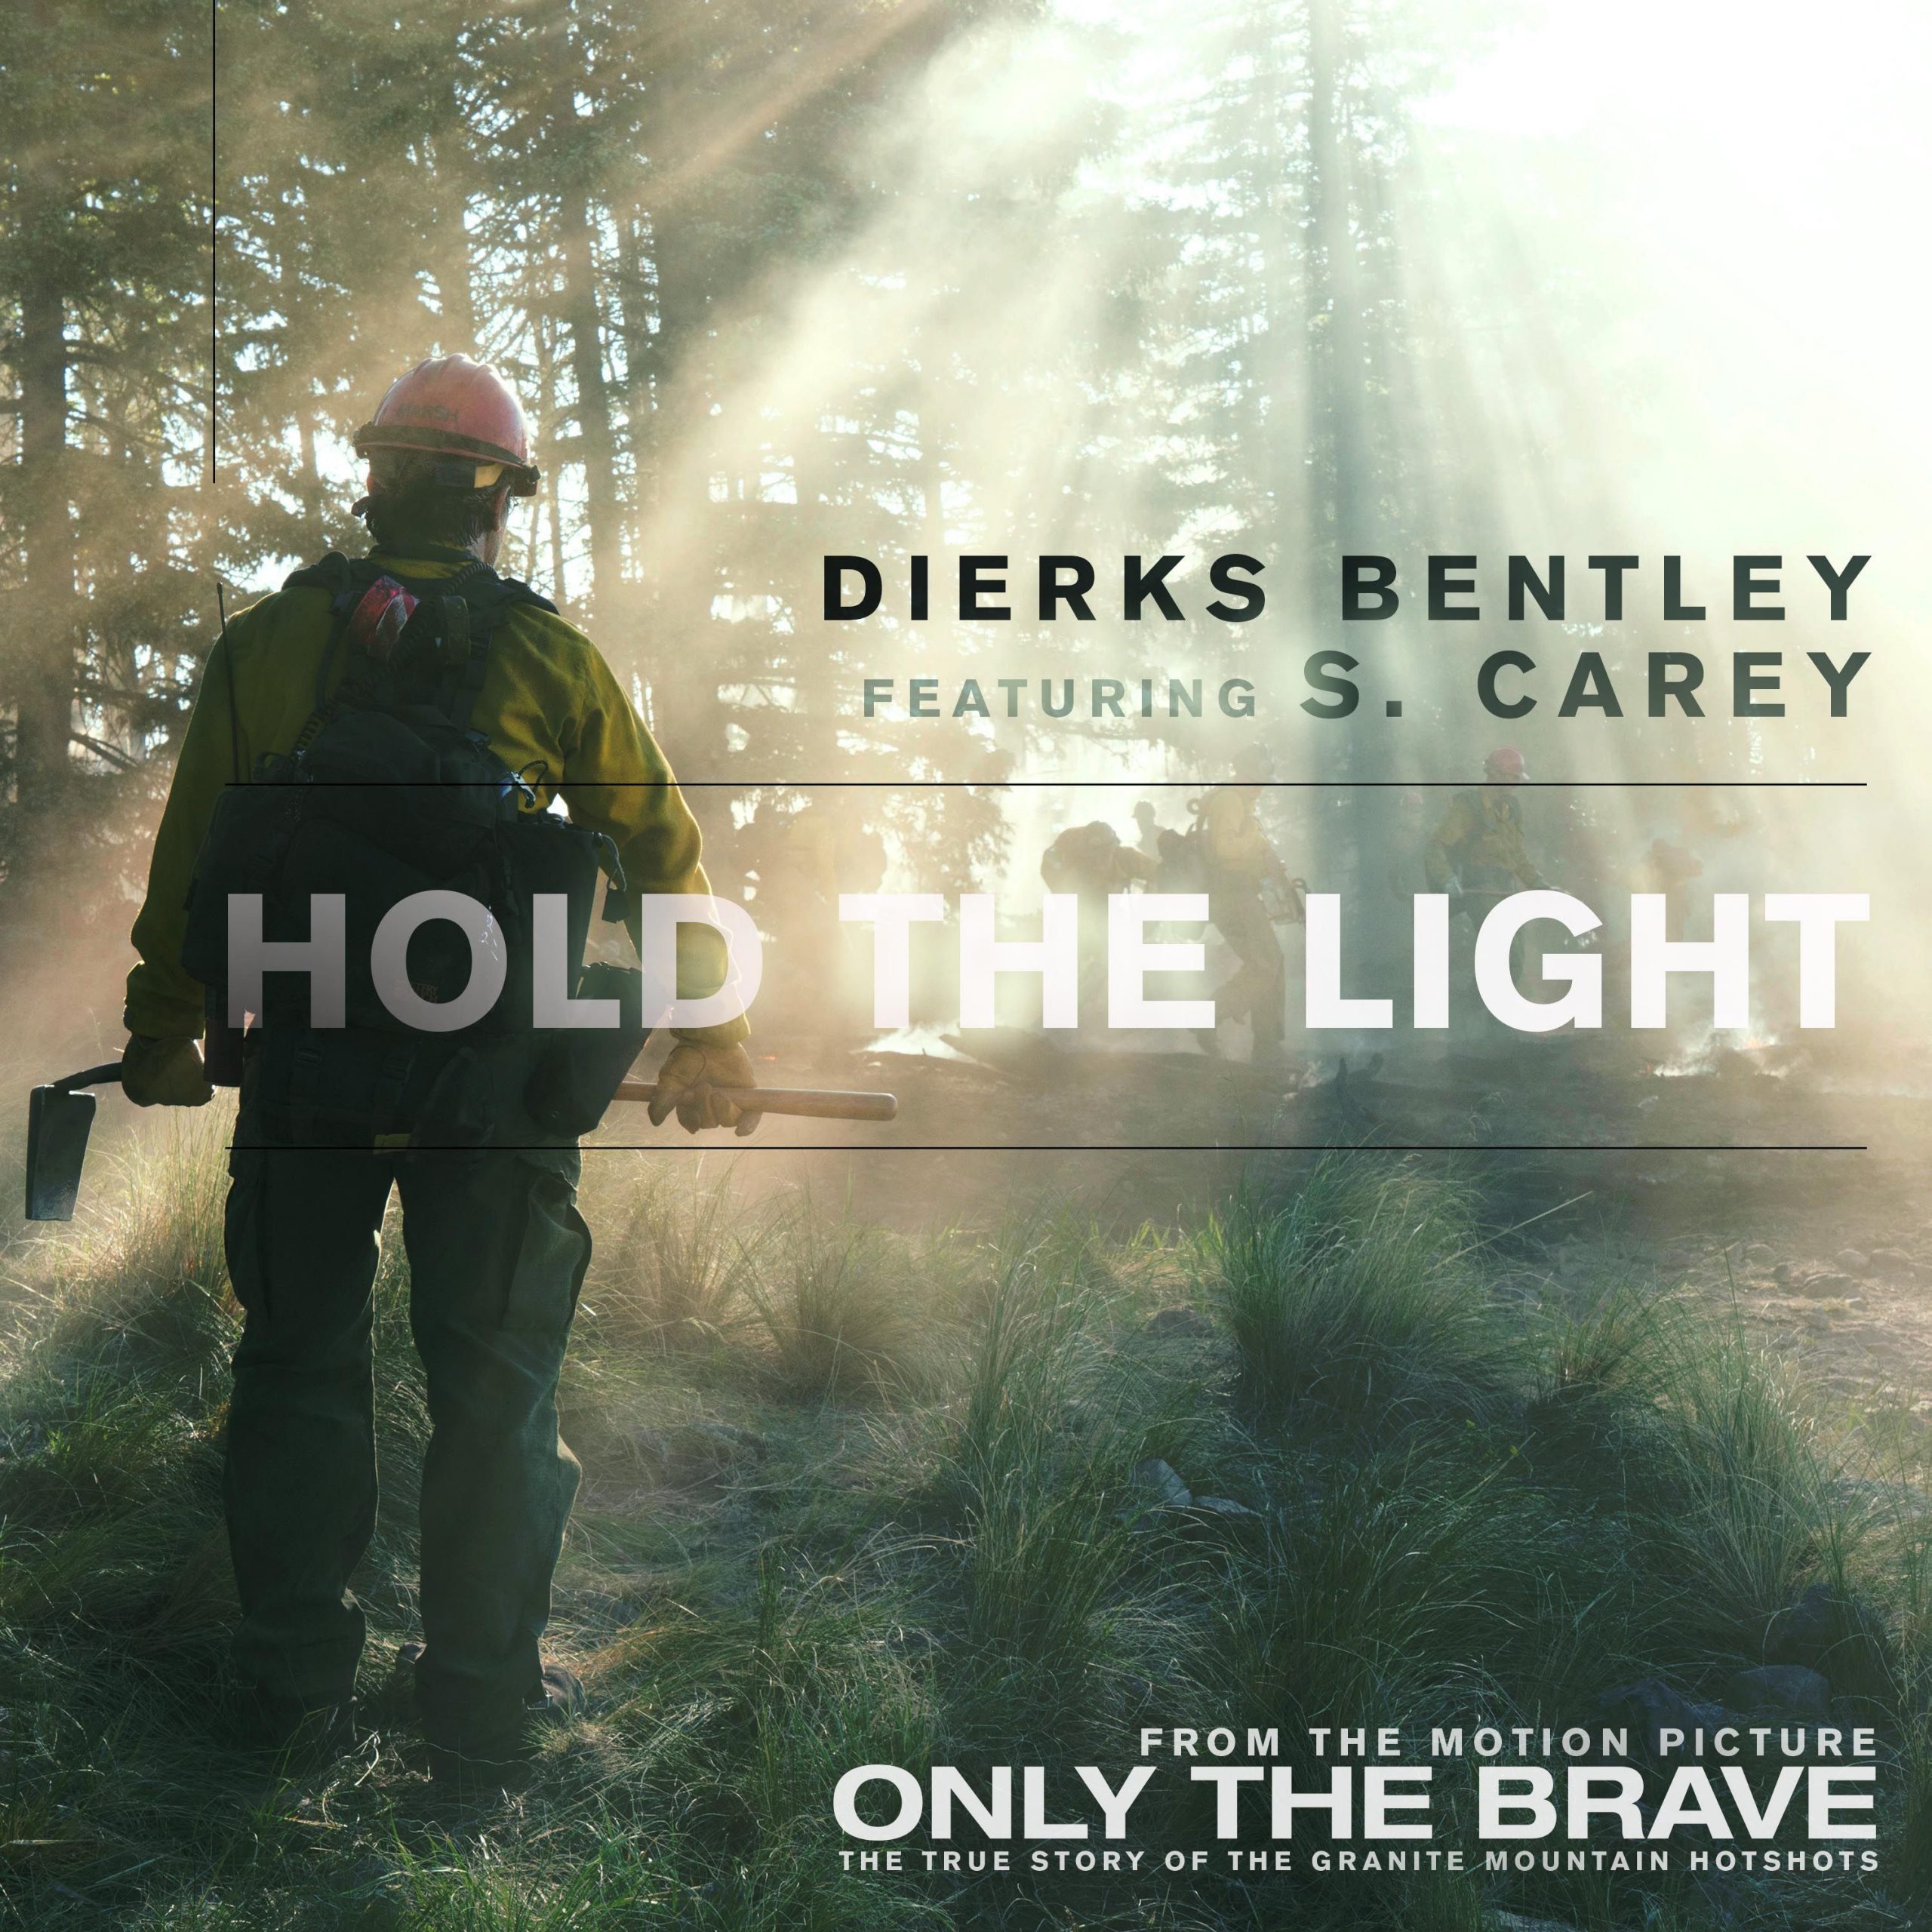 DIERKS BENTLEY AND BON IVER’S S. CAREY DELIVER POWERFUL MUSIC VIDEO TREATMENT FOR “HOLD THE LIGHT” TODAY